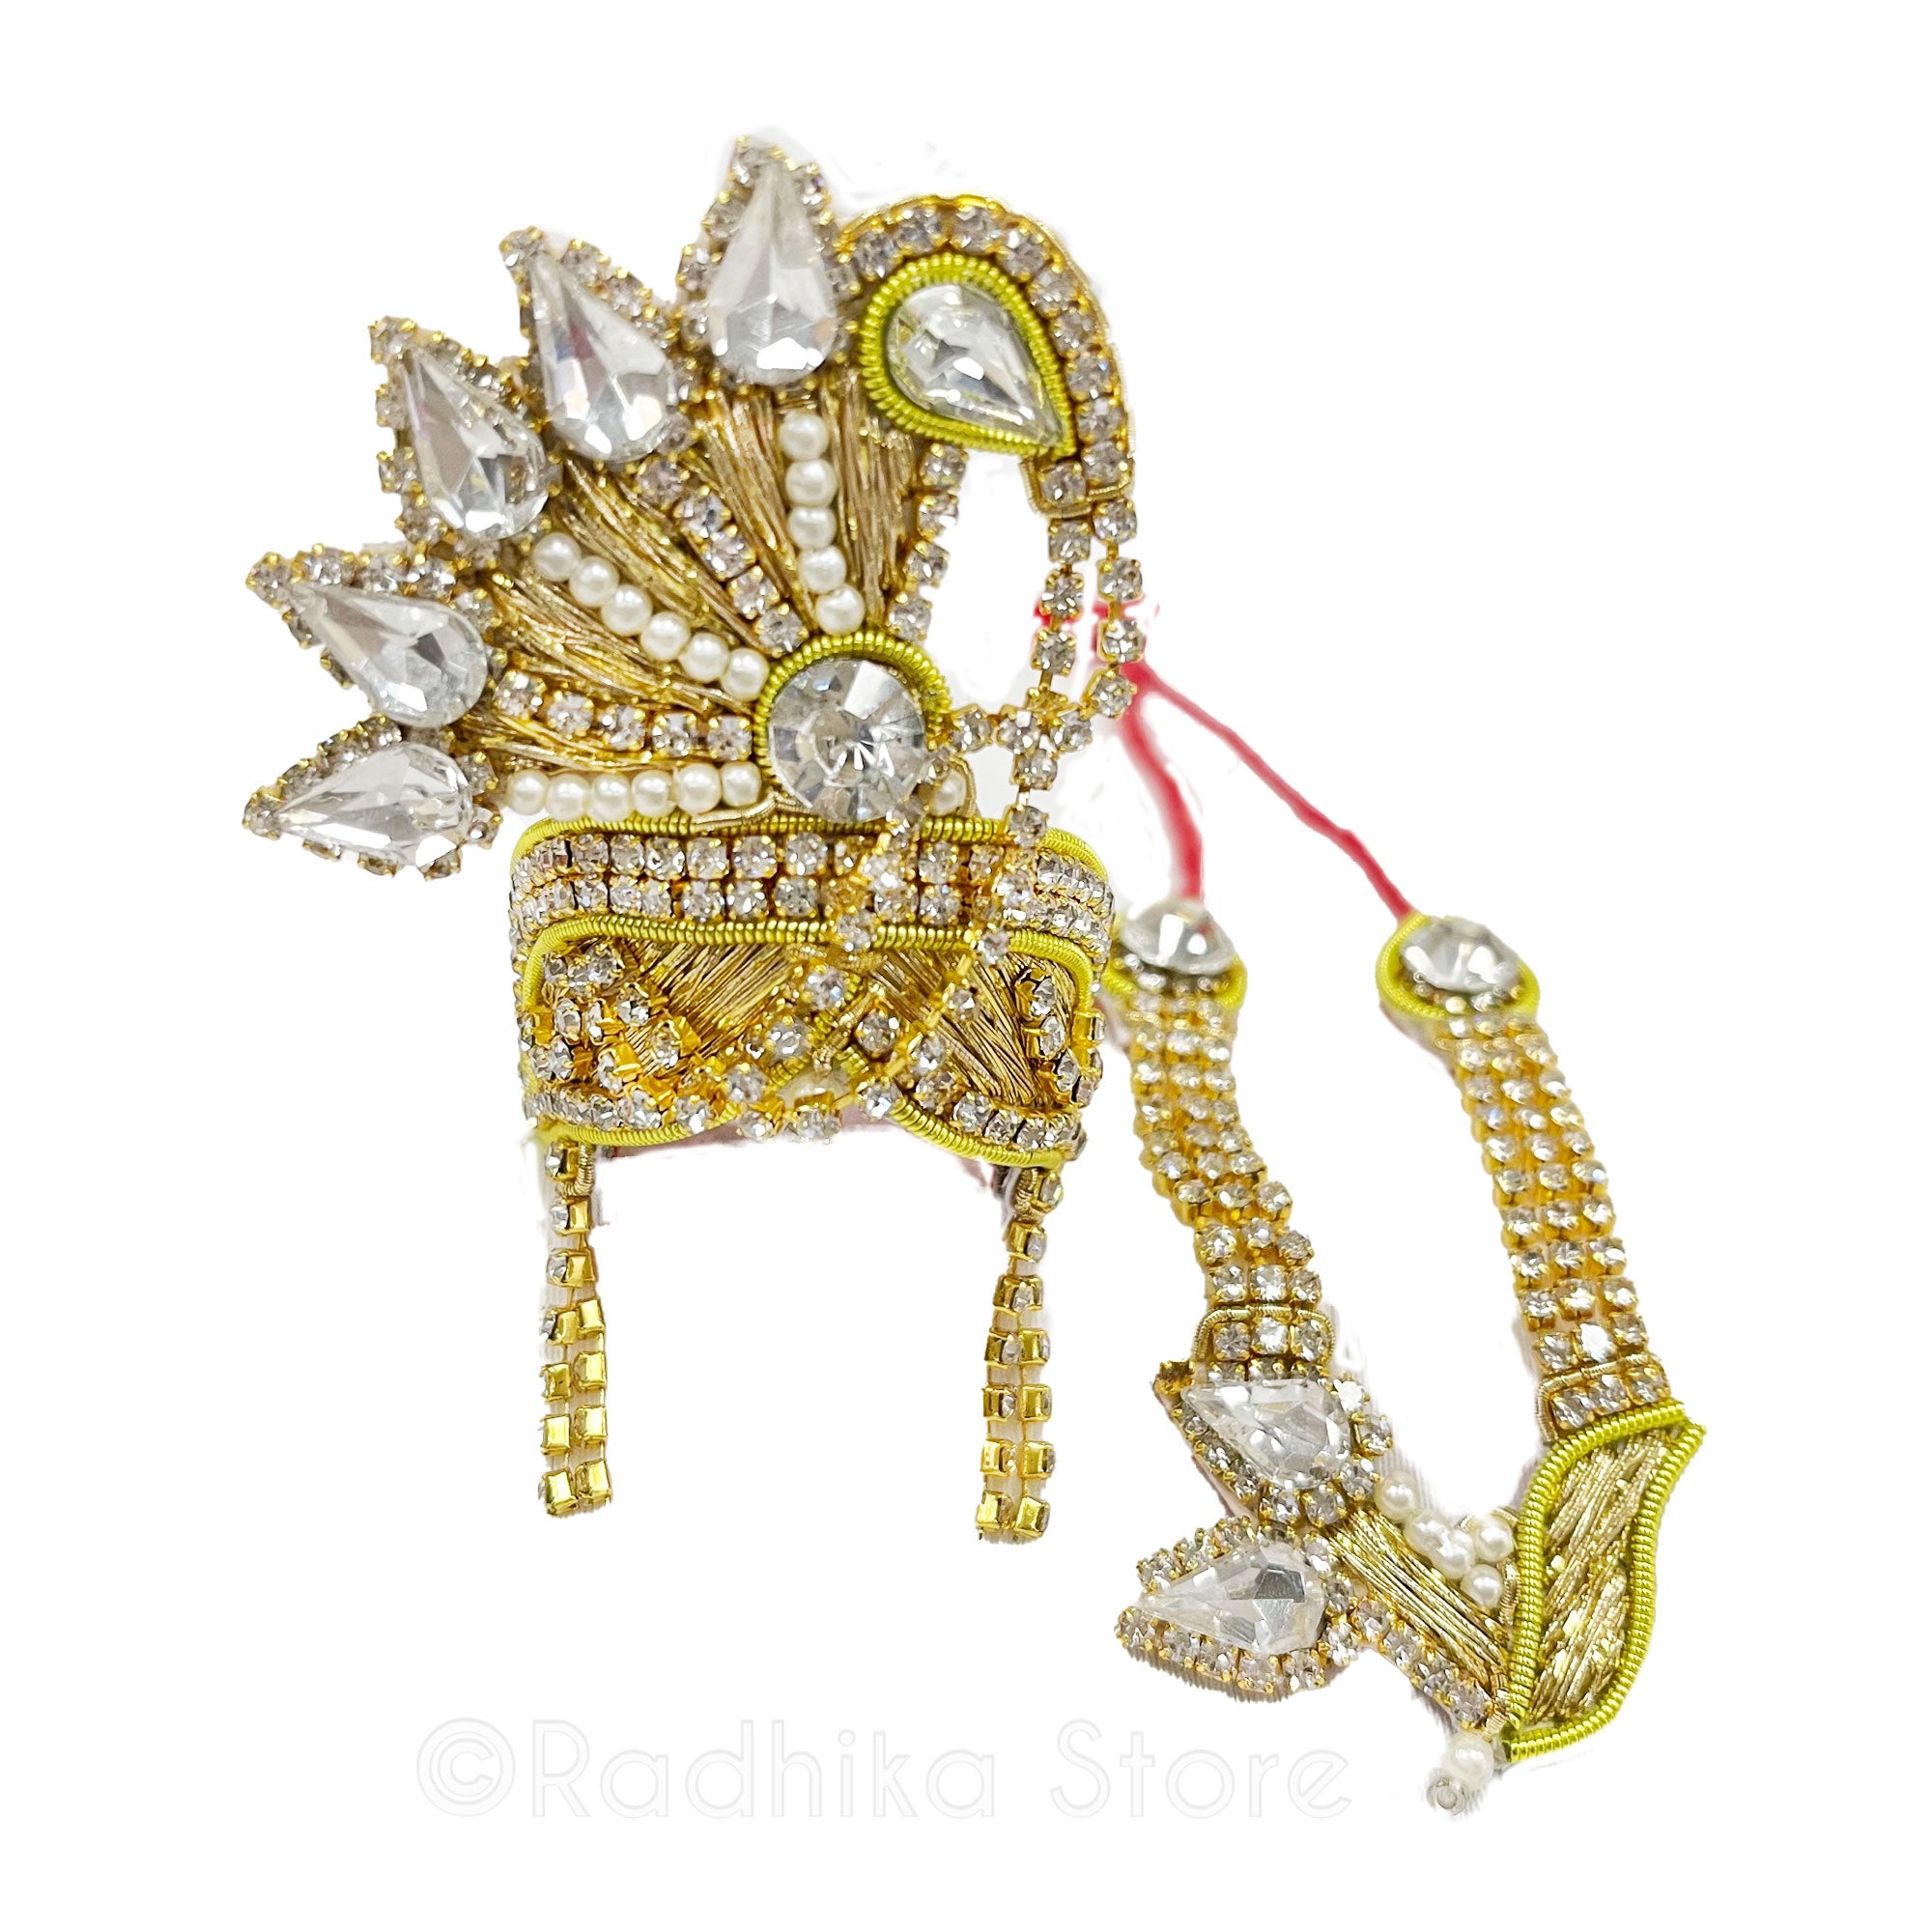 Majestic Golden Ananta - Deity Crown and Necklace Set